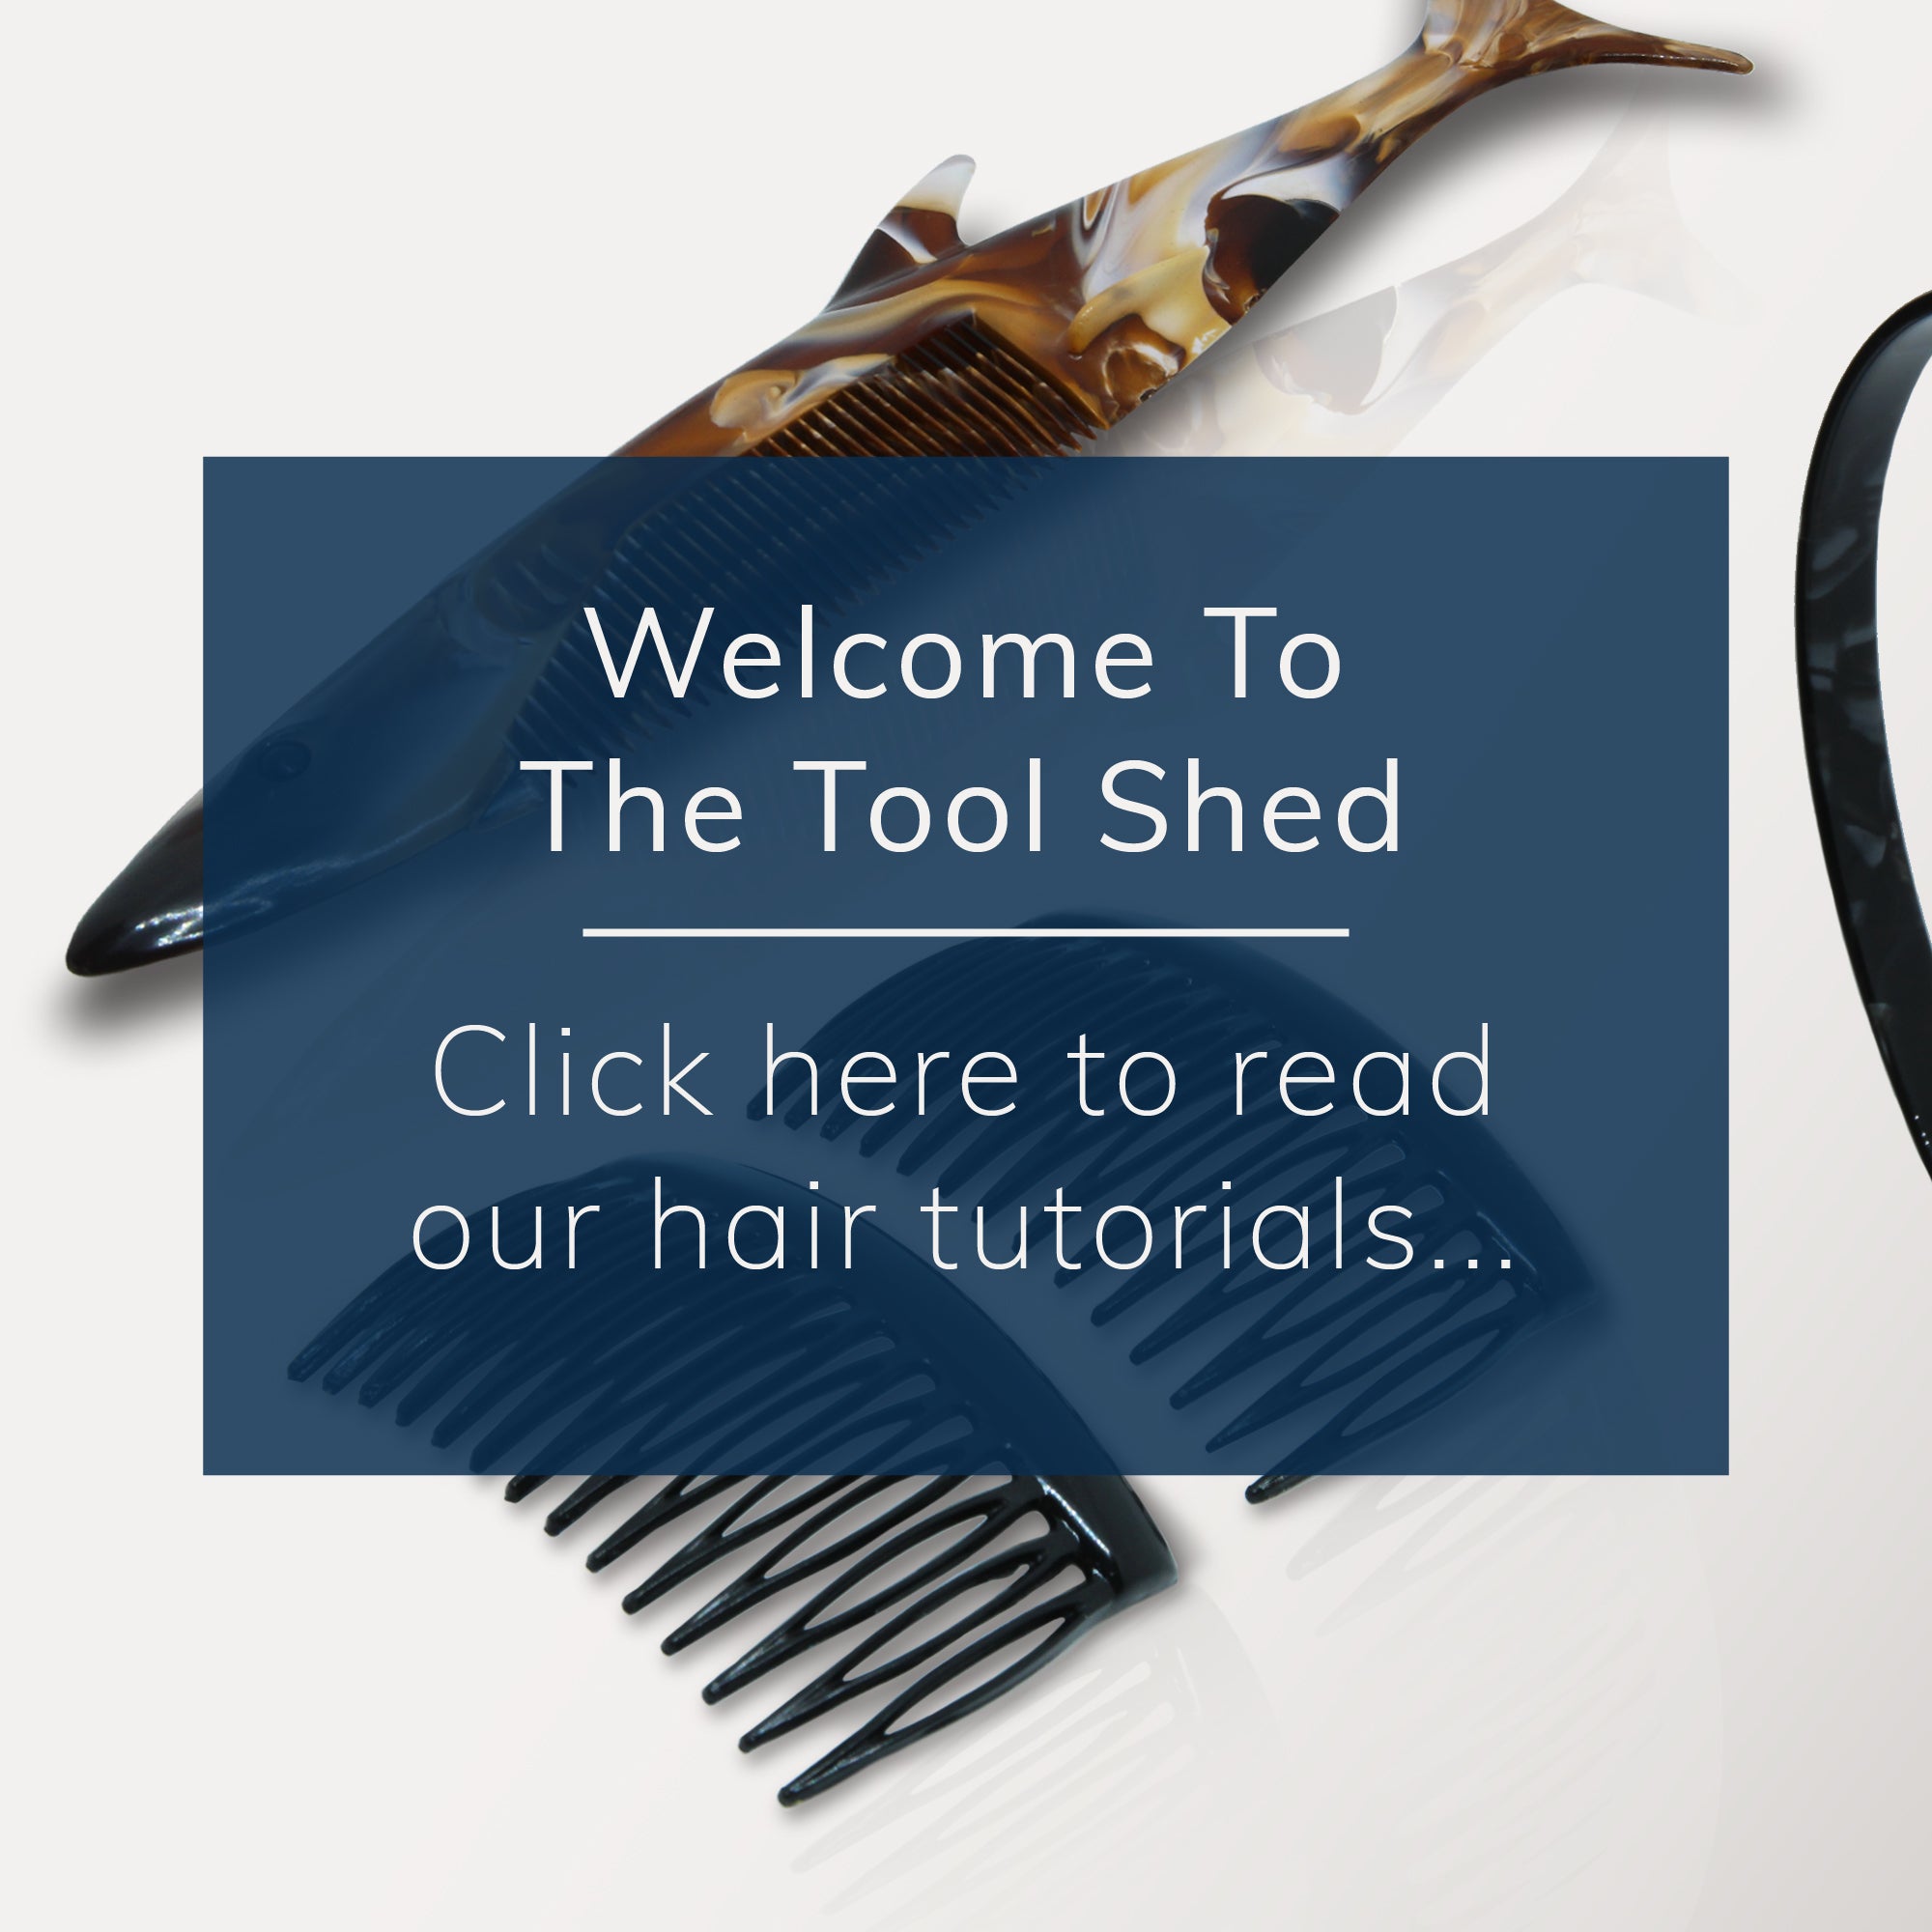 welcome to the tool shed, click here to read our hair tutorials...